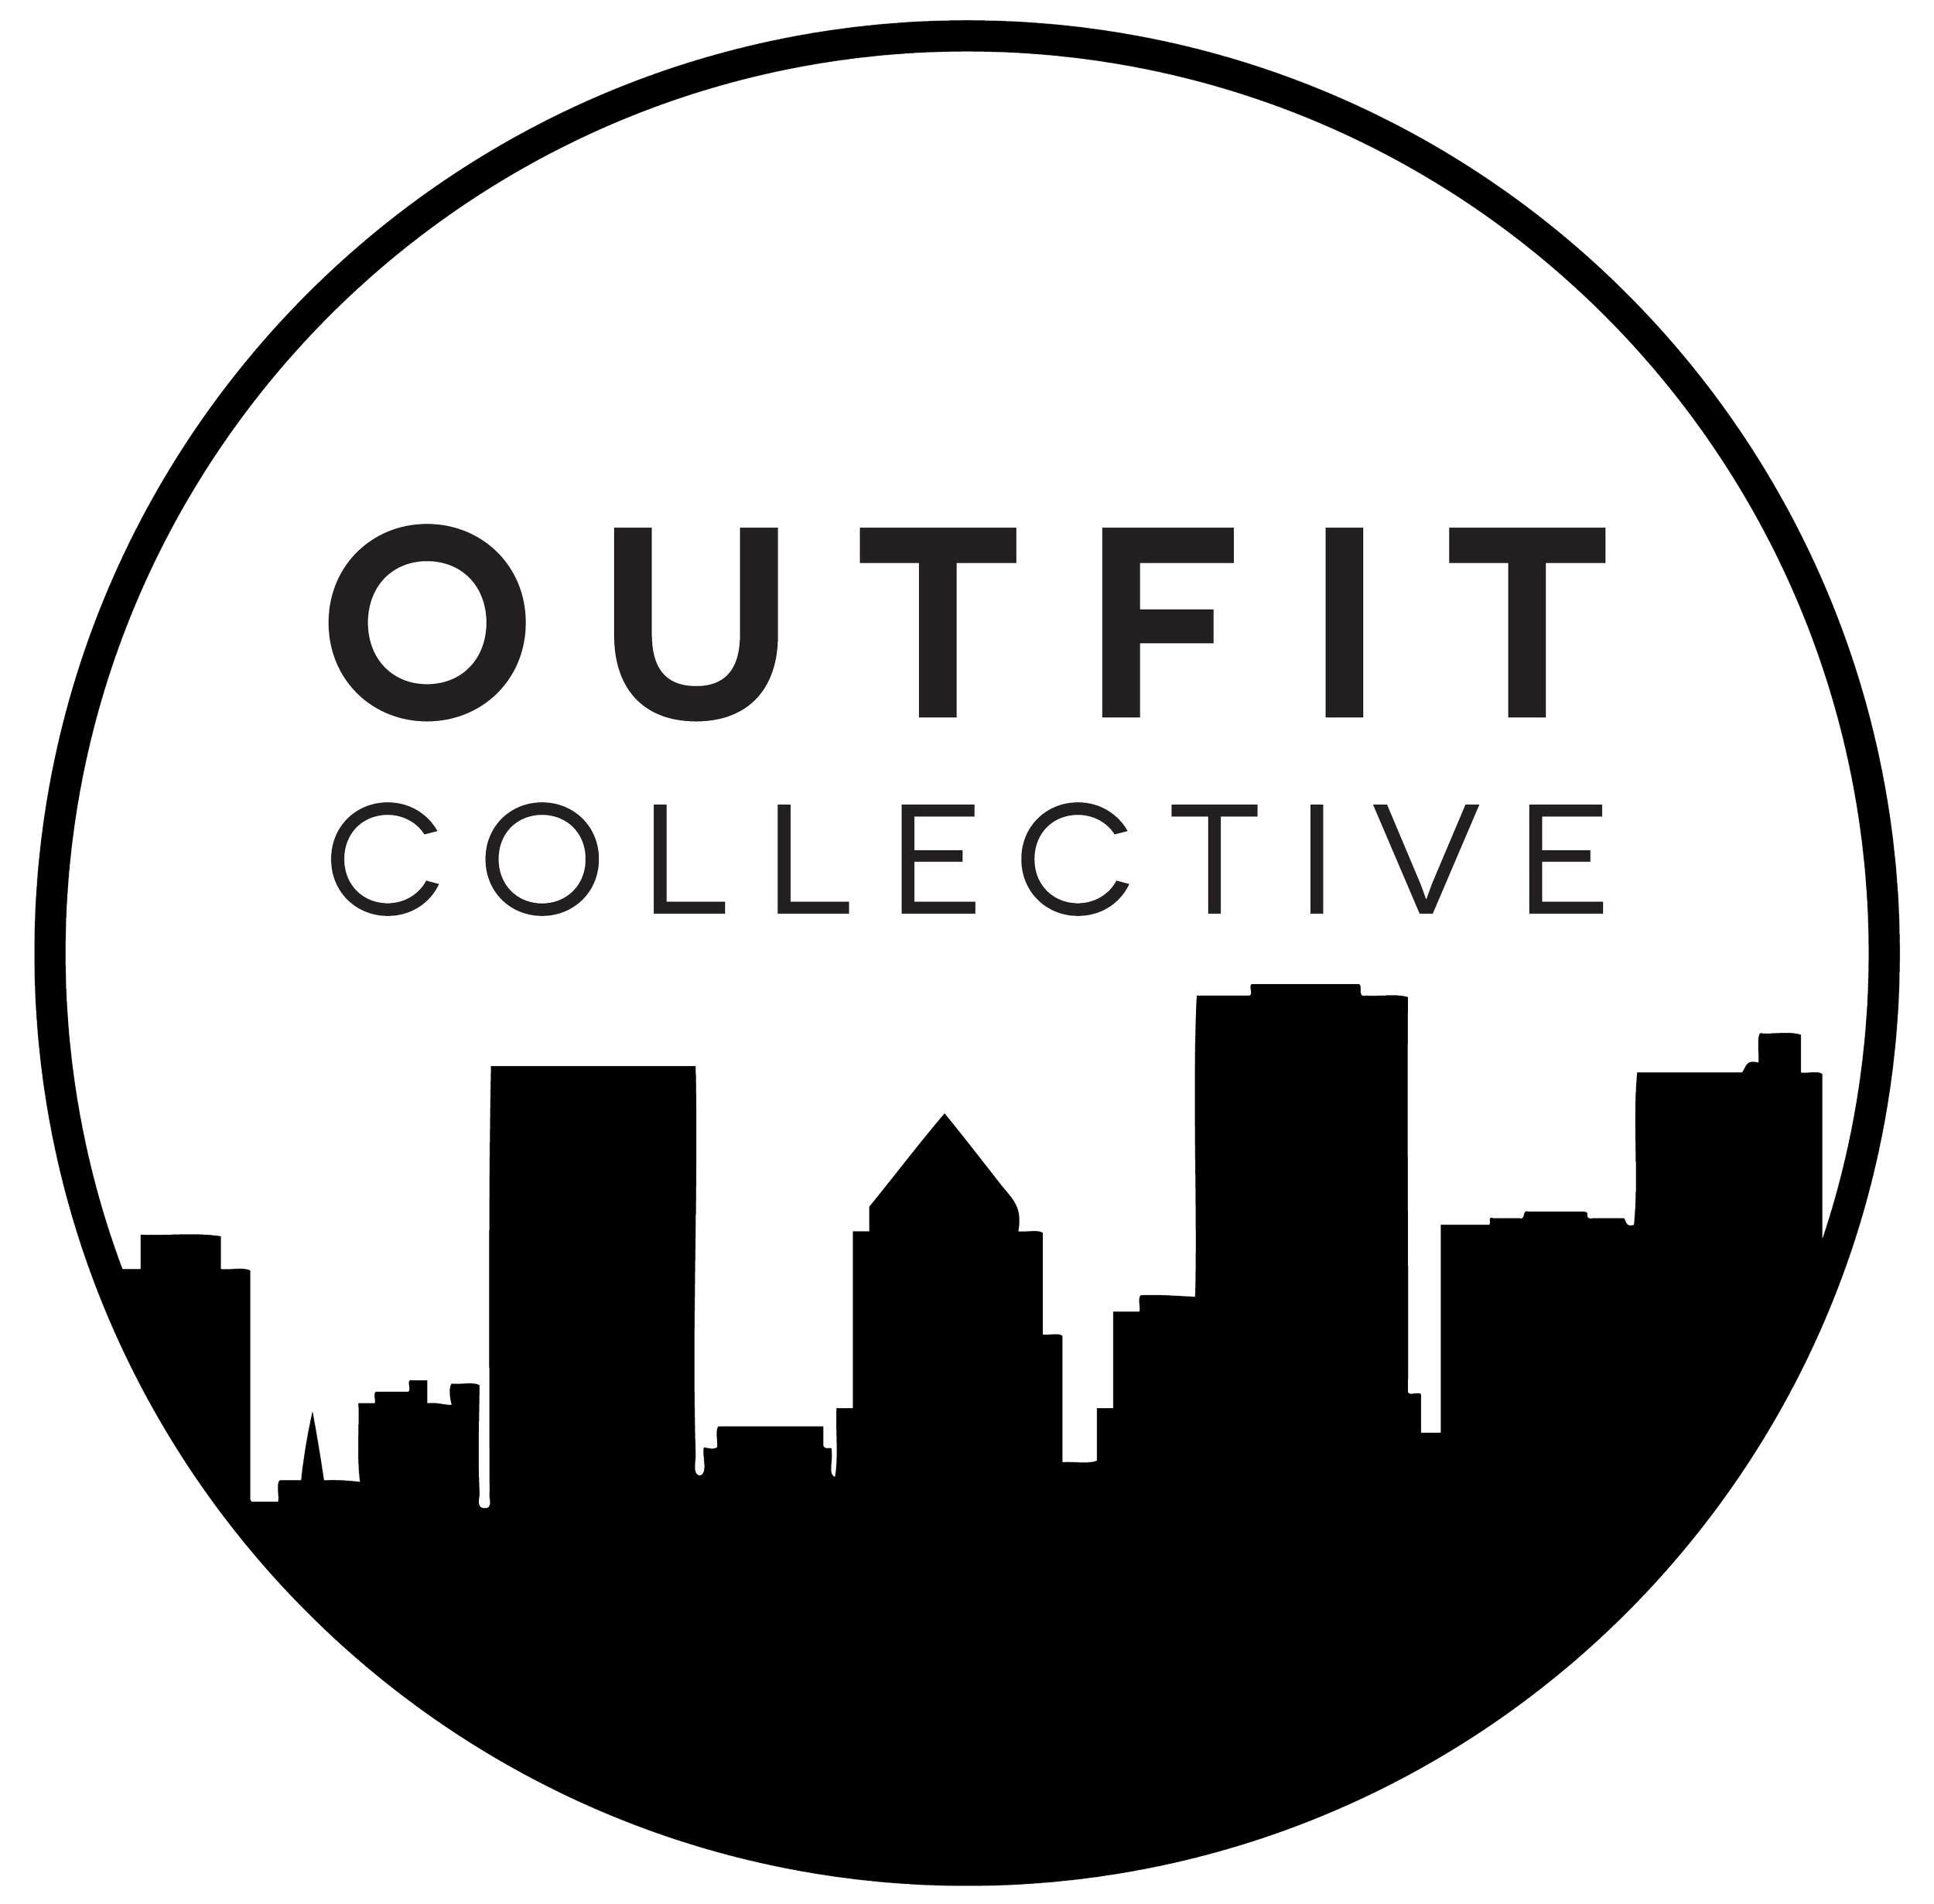 Outfit Collective - Outline Circle-01.png